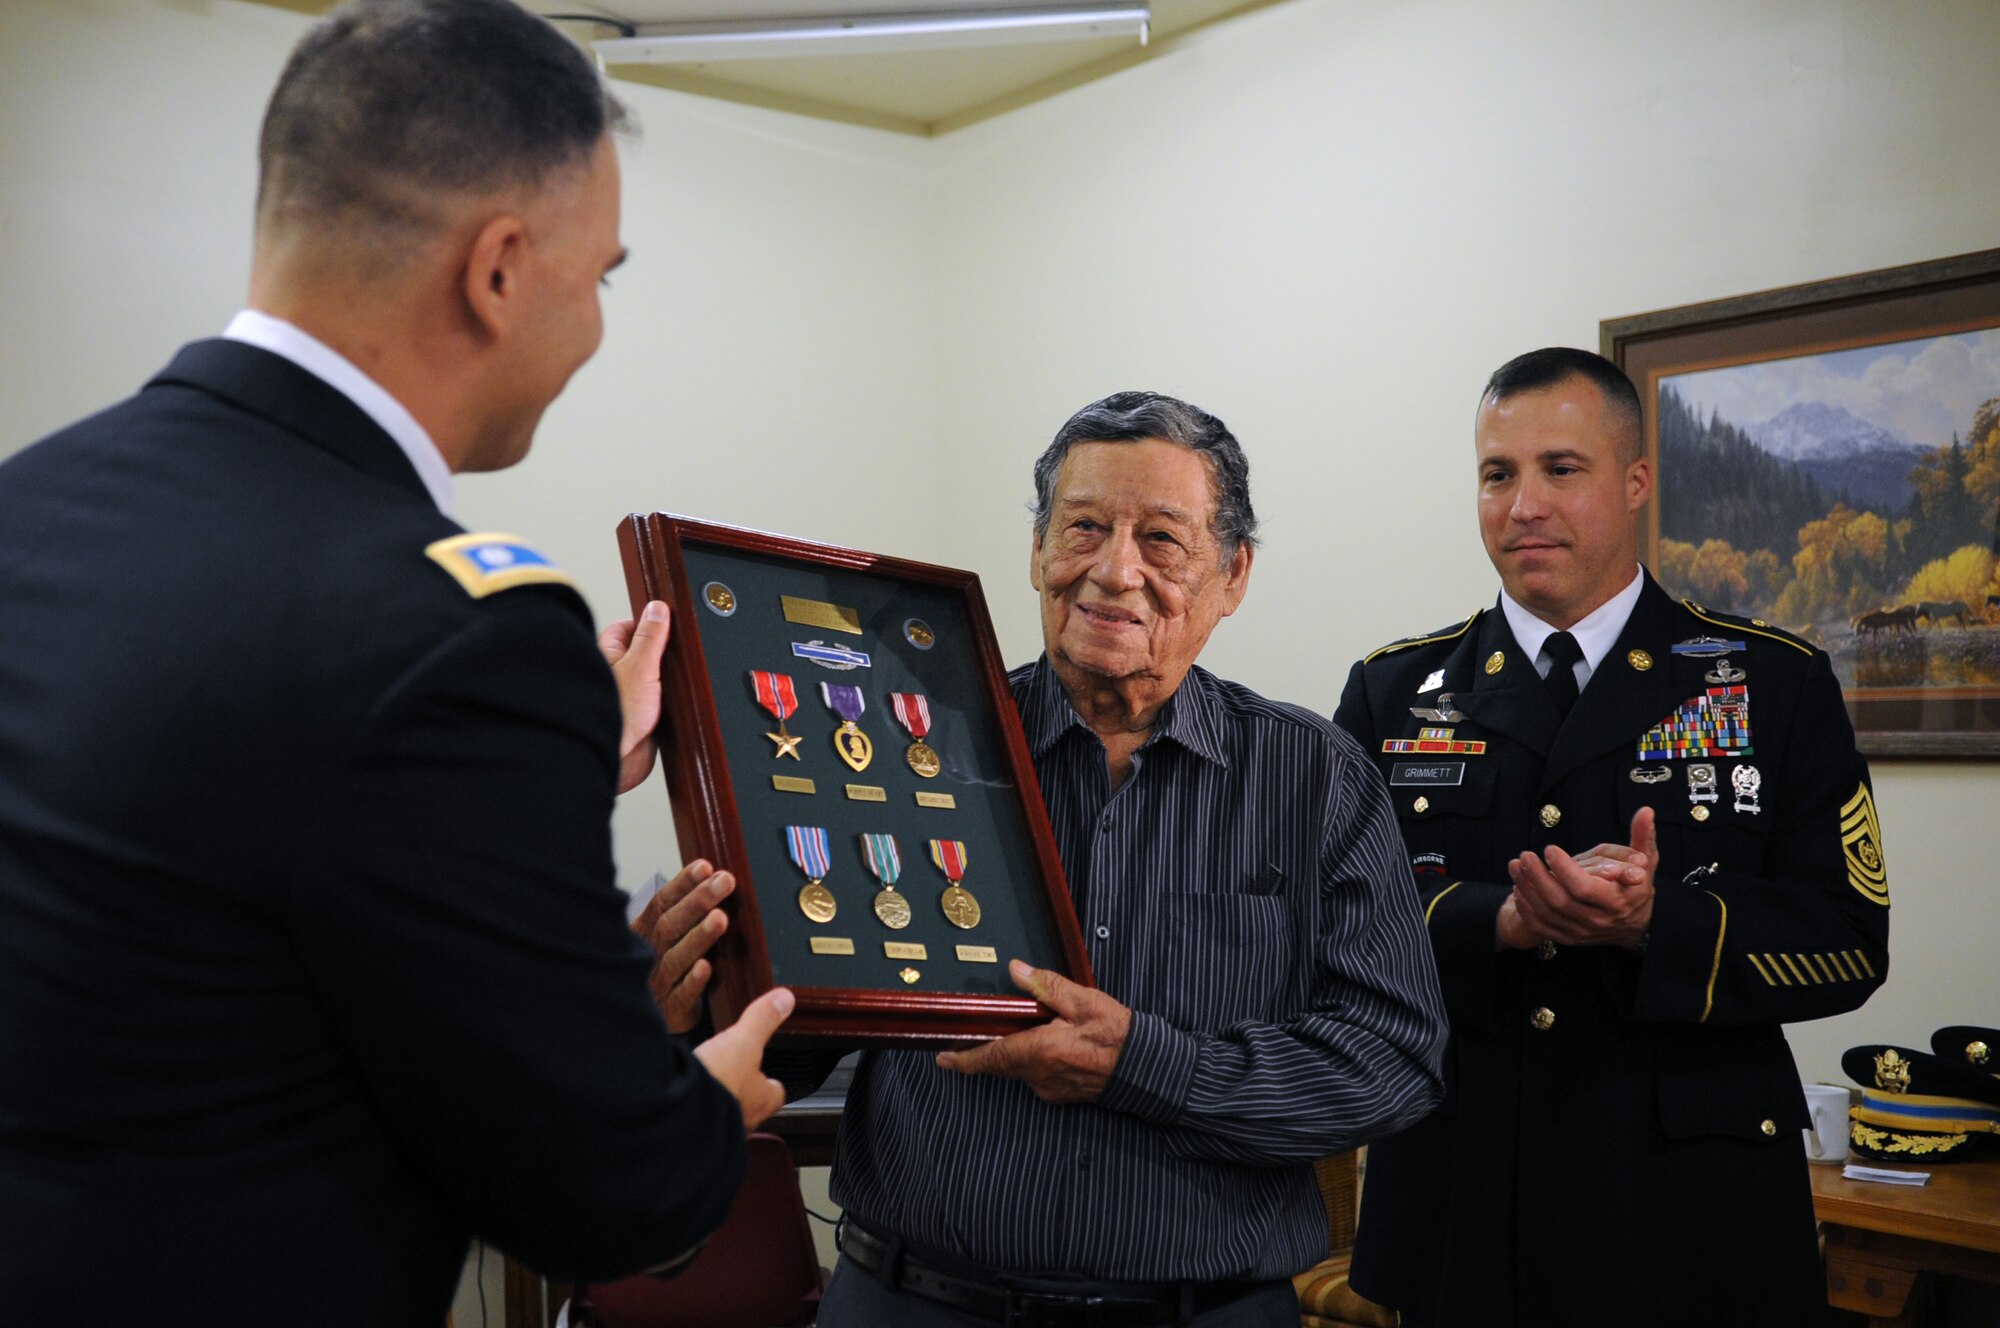 SAN ANGELO, Texas -- Army Lt. Col. Jason D. Hallock, 344th Military Intelligence Battalion Commander, and Command Sgt. Maj. Naamon J. Grimmett, present Gilberto R. Torres, a World War II veteran, with a shadowbox of Torres’ decorations during a ceremony here July 2. During his time in service, Torres earned the Bronze Star, Purple Heart, Good Conduct Medal, American Campaign Medal, European-African-Middle Eastern Campaign Medal, Victory Medal, Combat Infantryman Badge and Honorable Service Lapel. (U.S. Air Force photo/ Staff Sgt. Laura R. McFarlane)